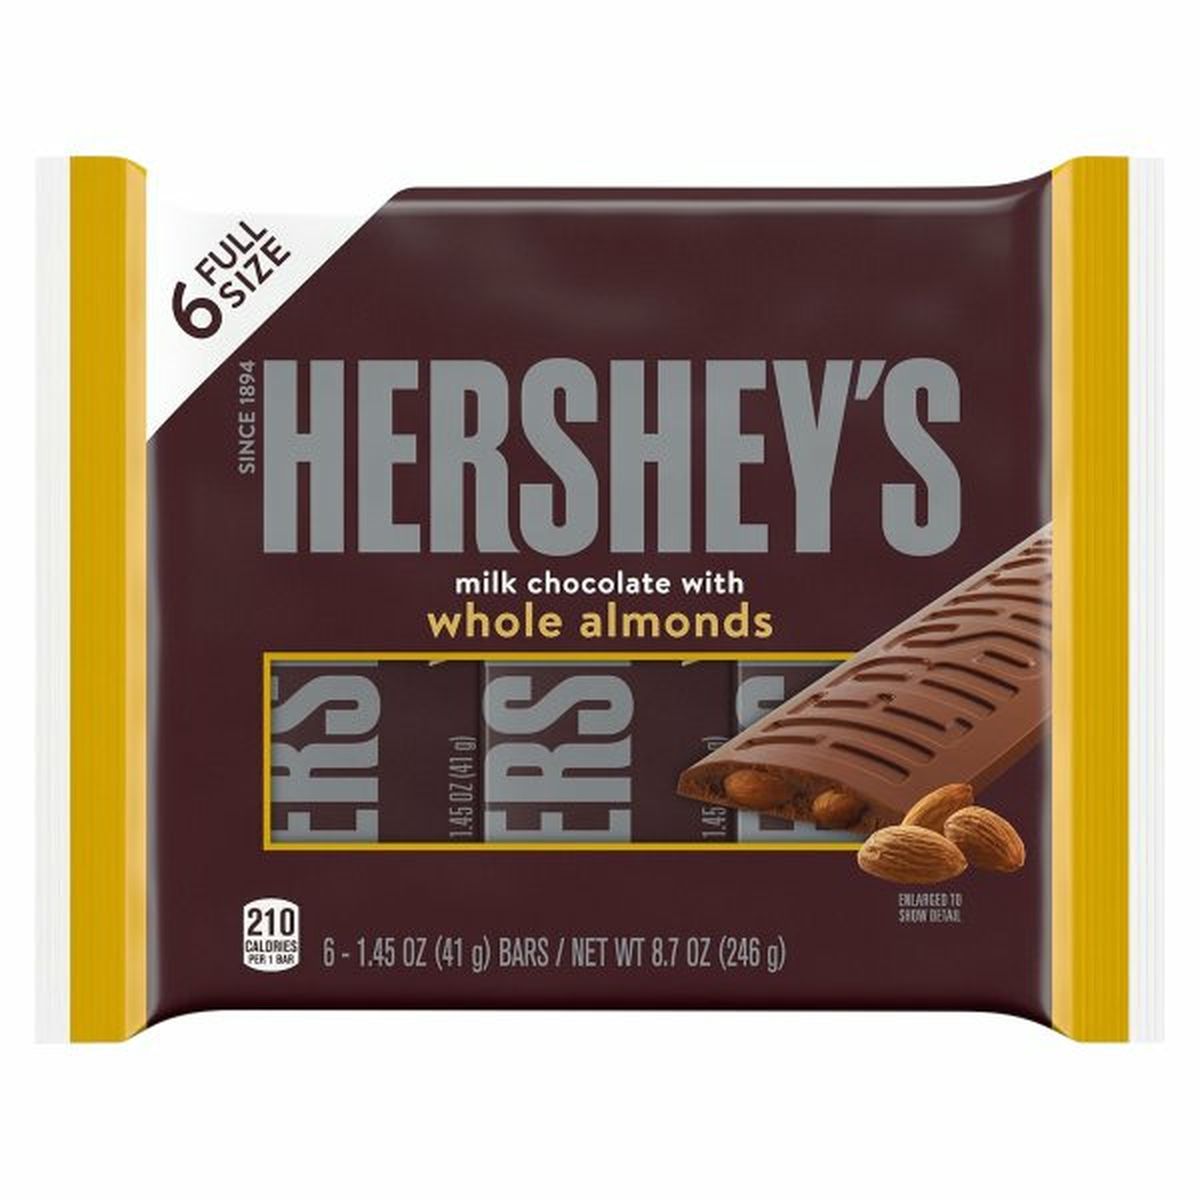 Calories in Hershey's Milk Chocolate, with Almonds, Full Size